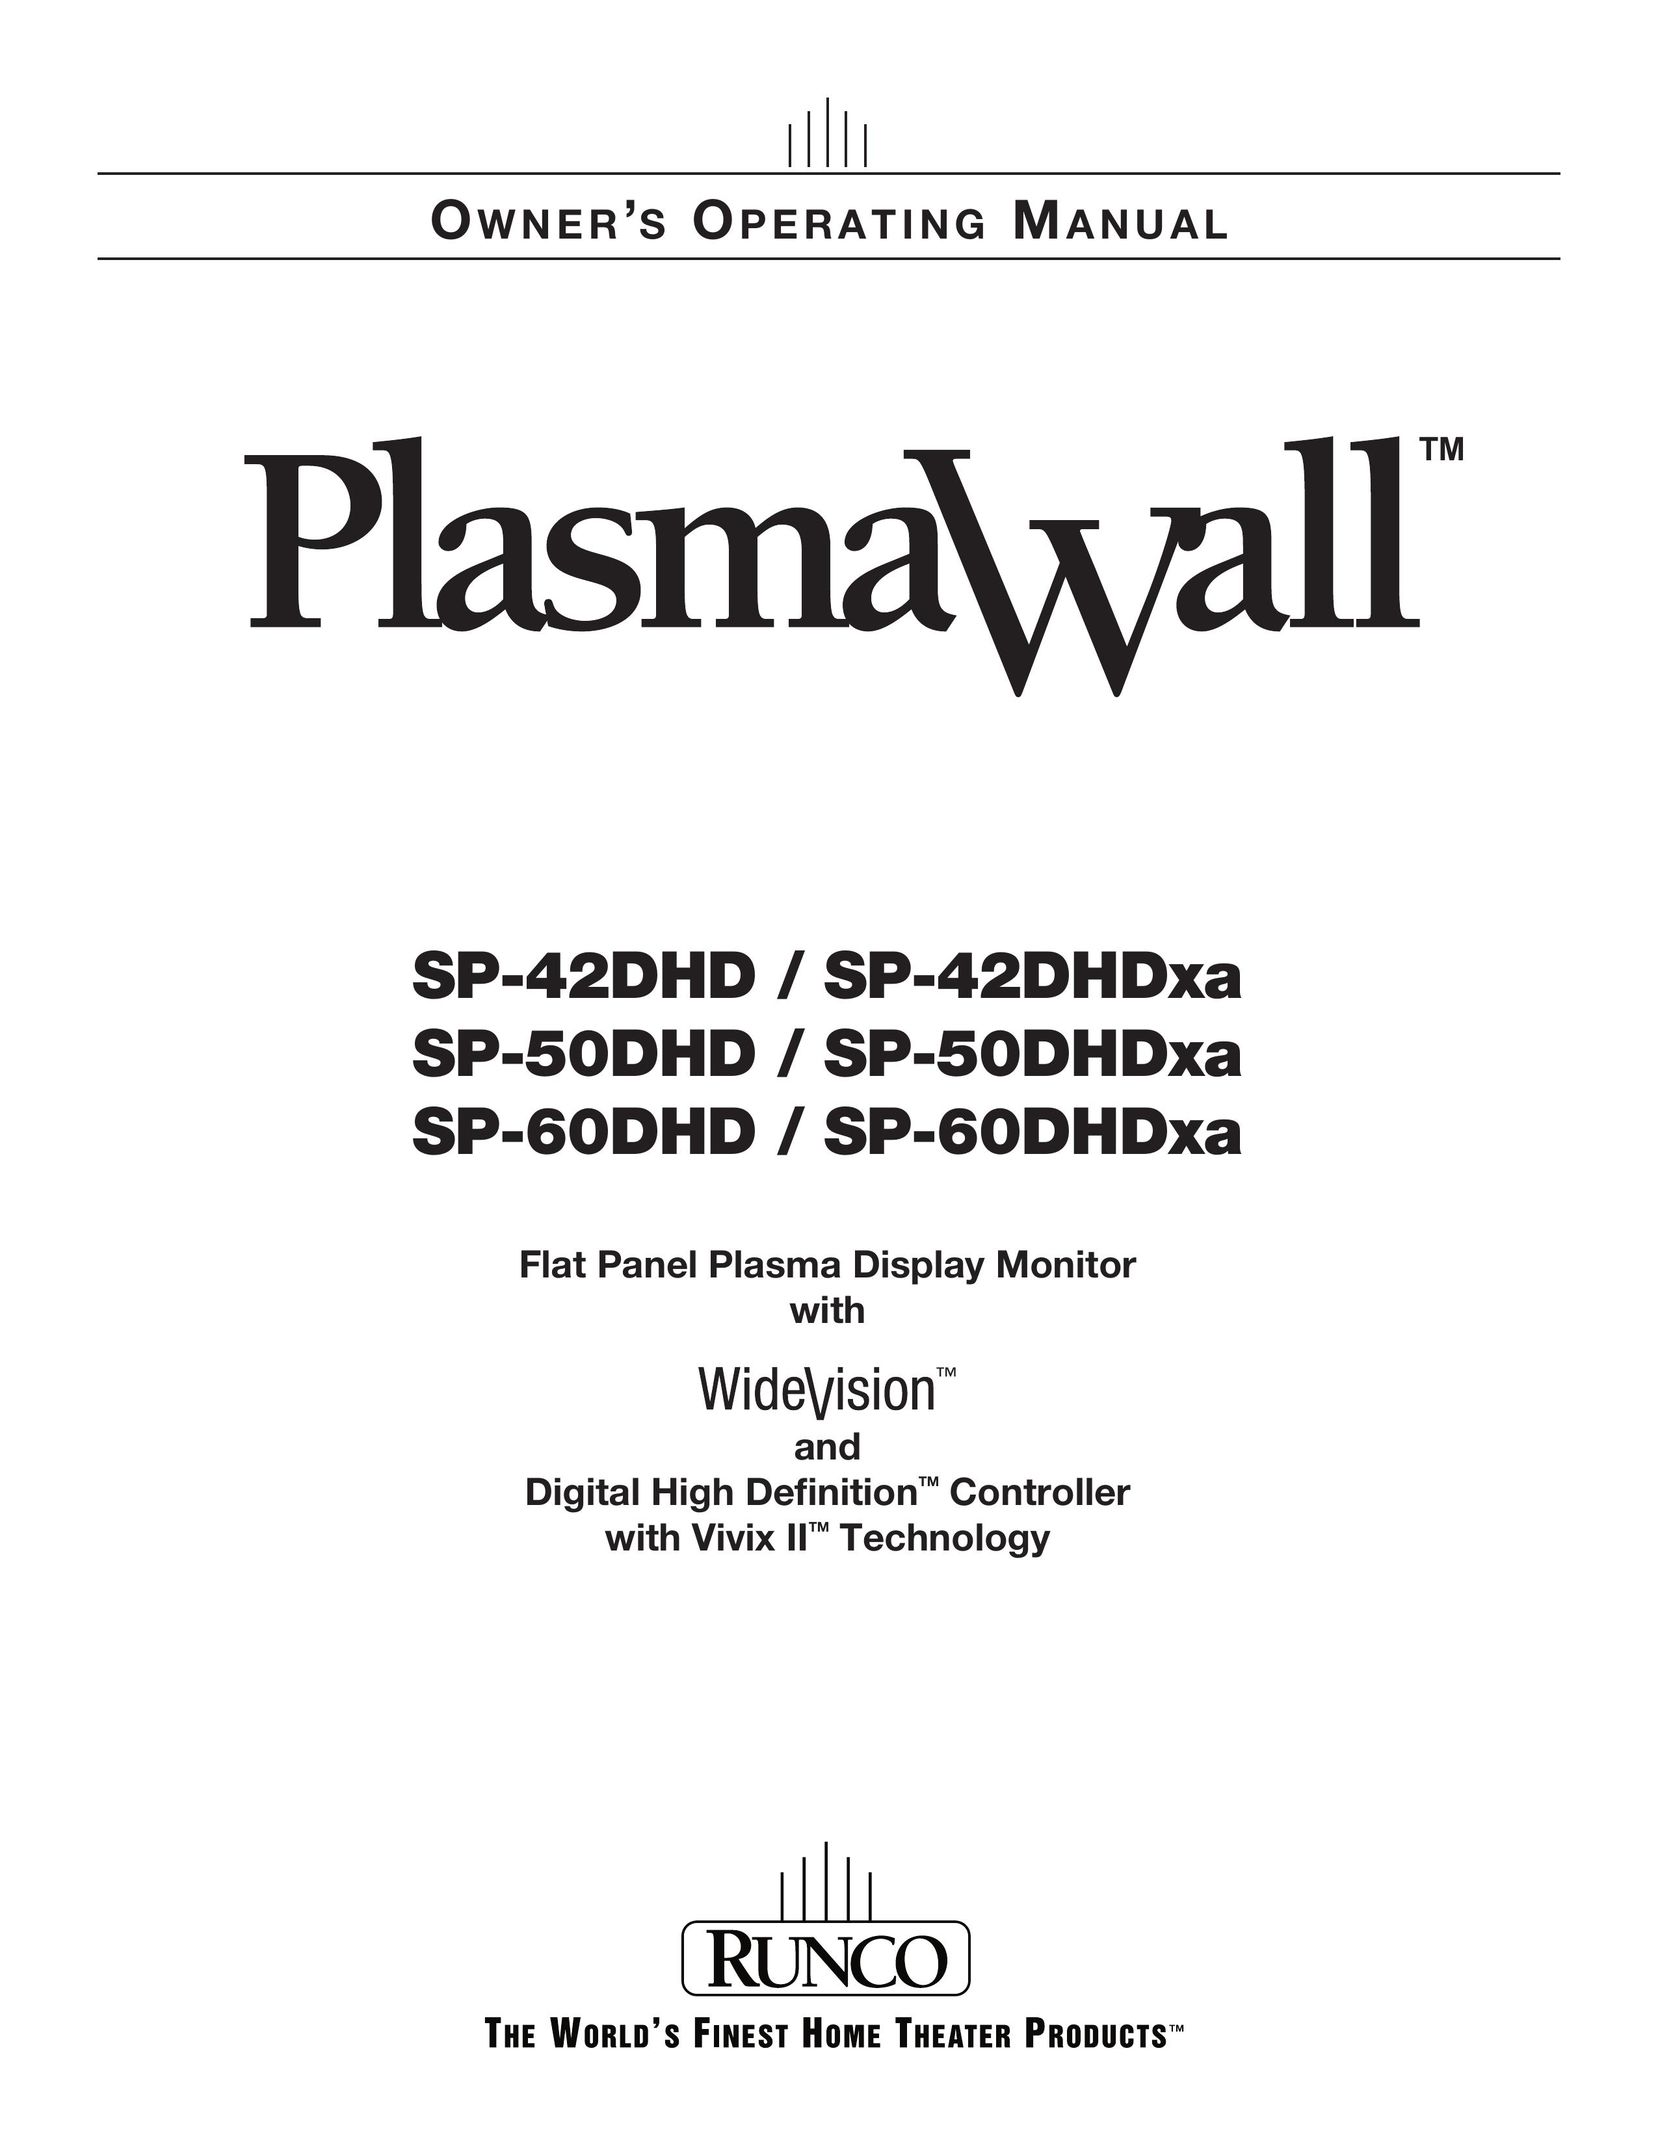 Runco SP-42DHD / SP-42DHDXA Flat Panel Television User Manual